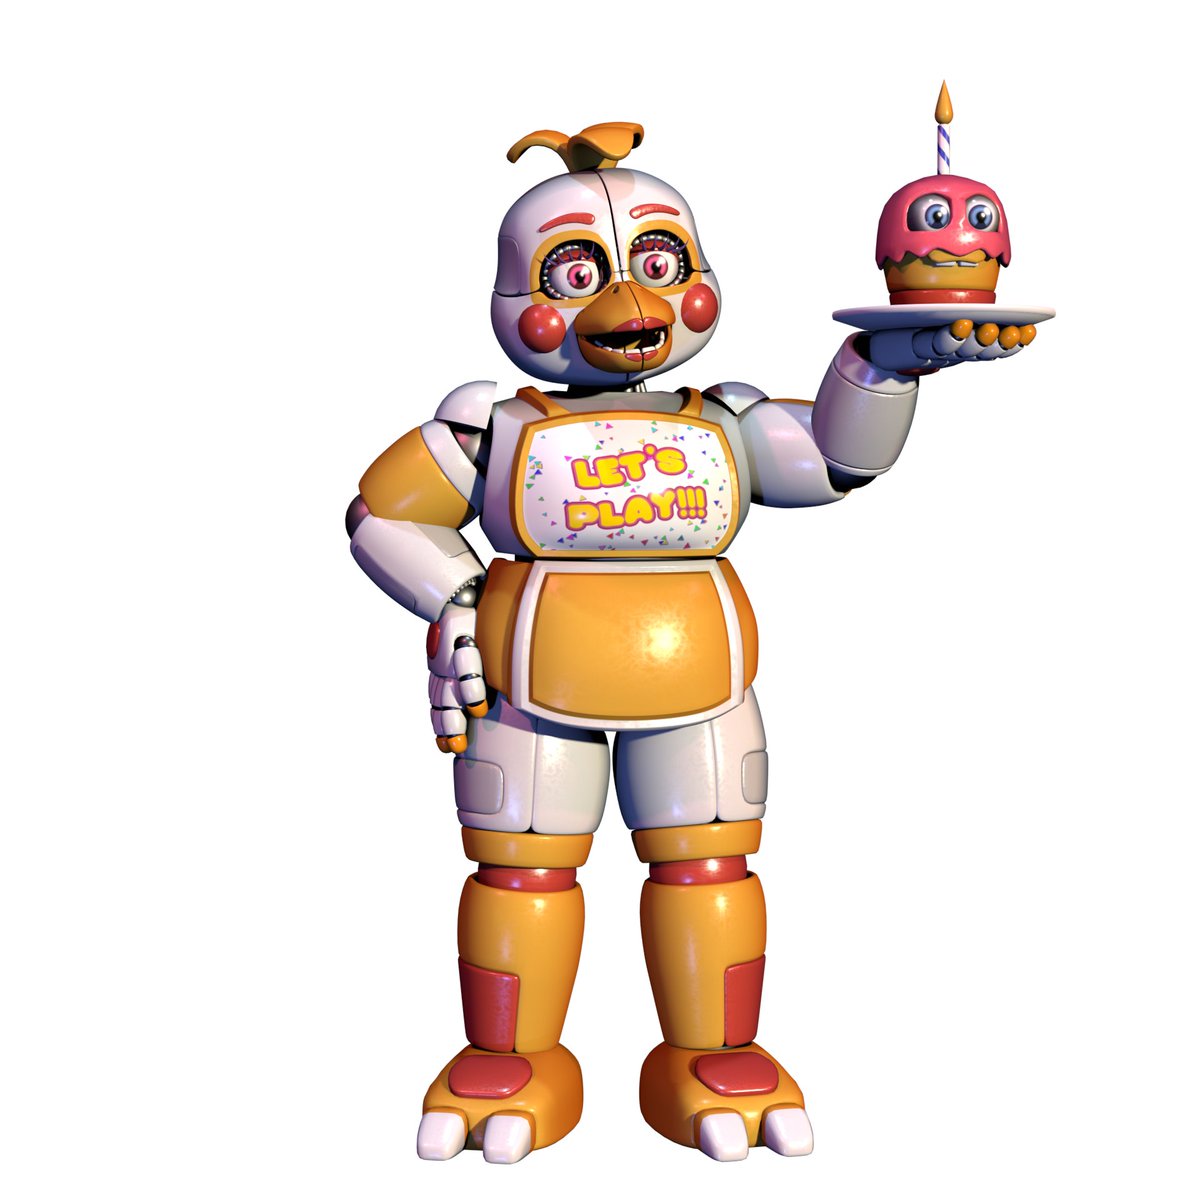 Final Fanmade Funtime Chica Design